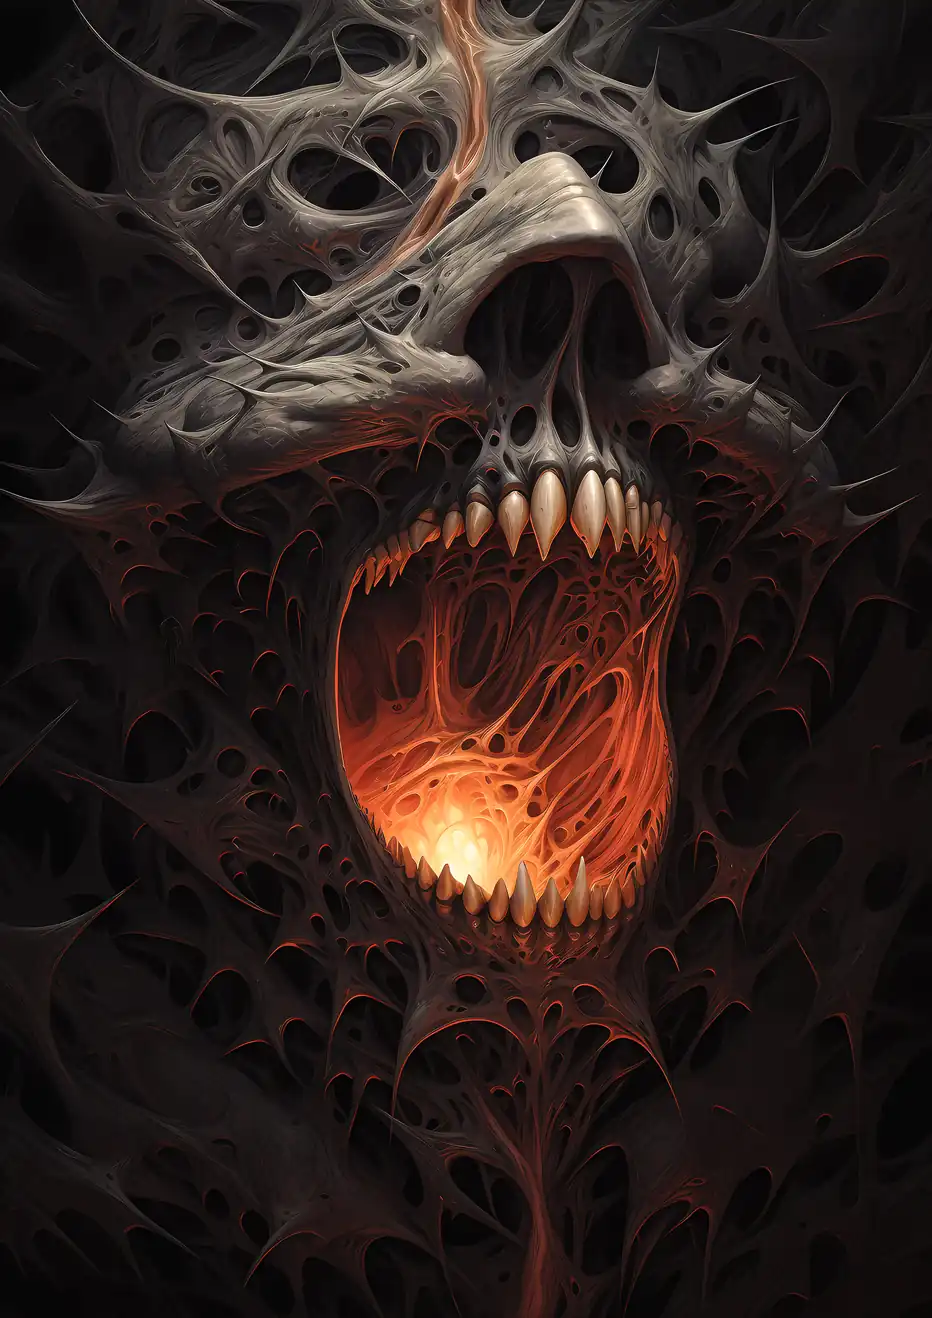 Bite of the Abyss. A screaming skull enmeshed in an organic web with a fiery light.